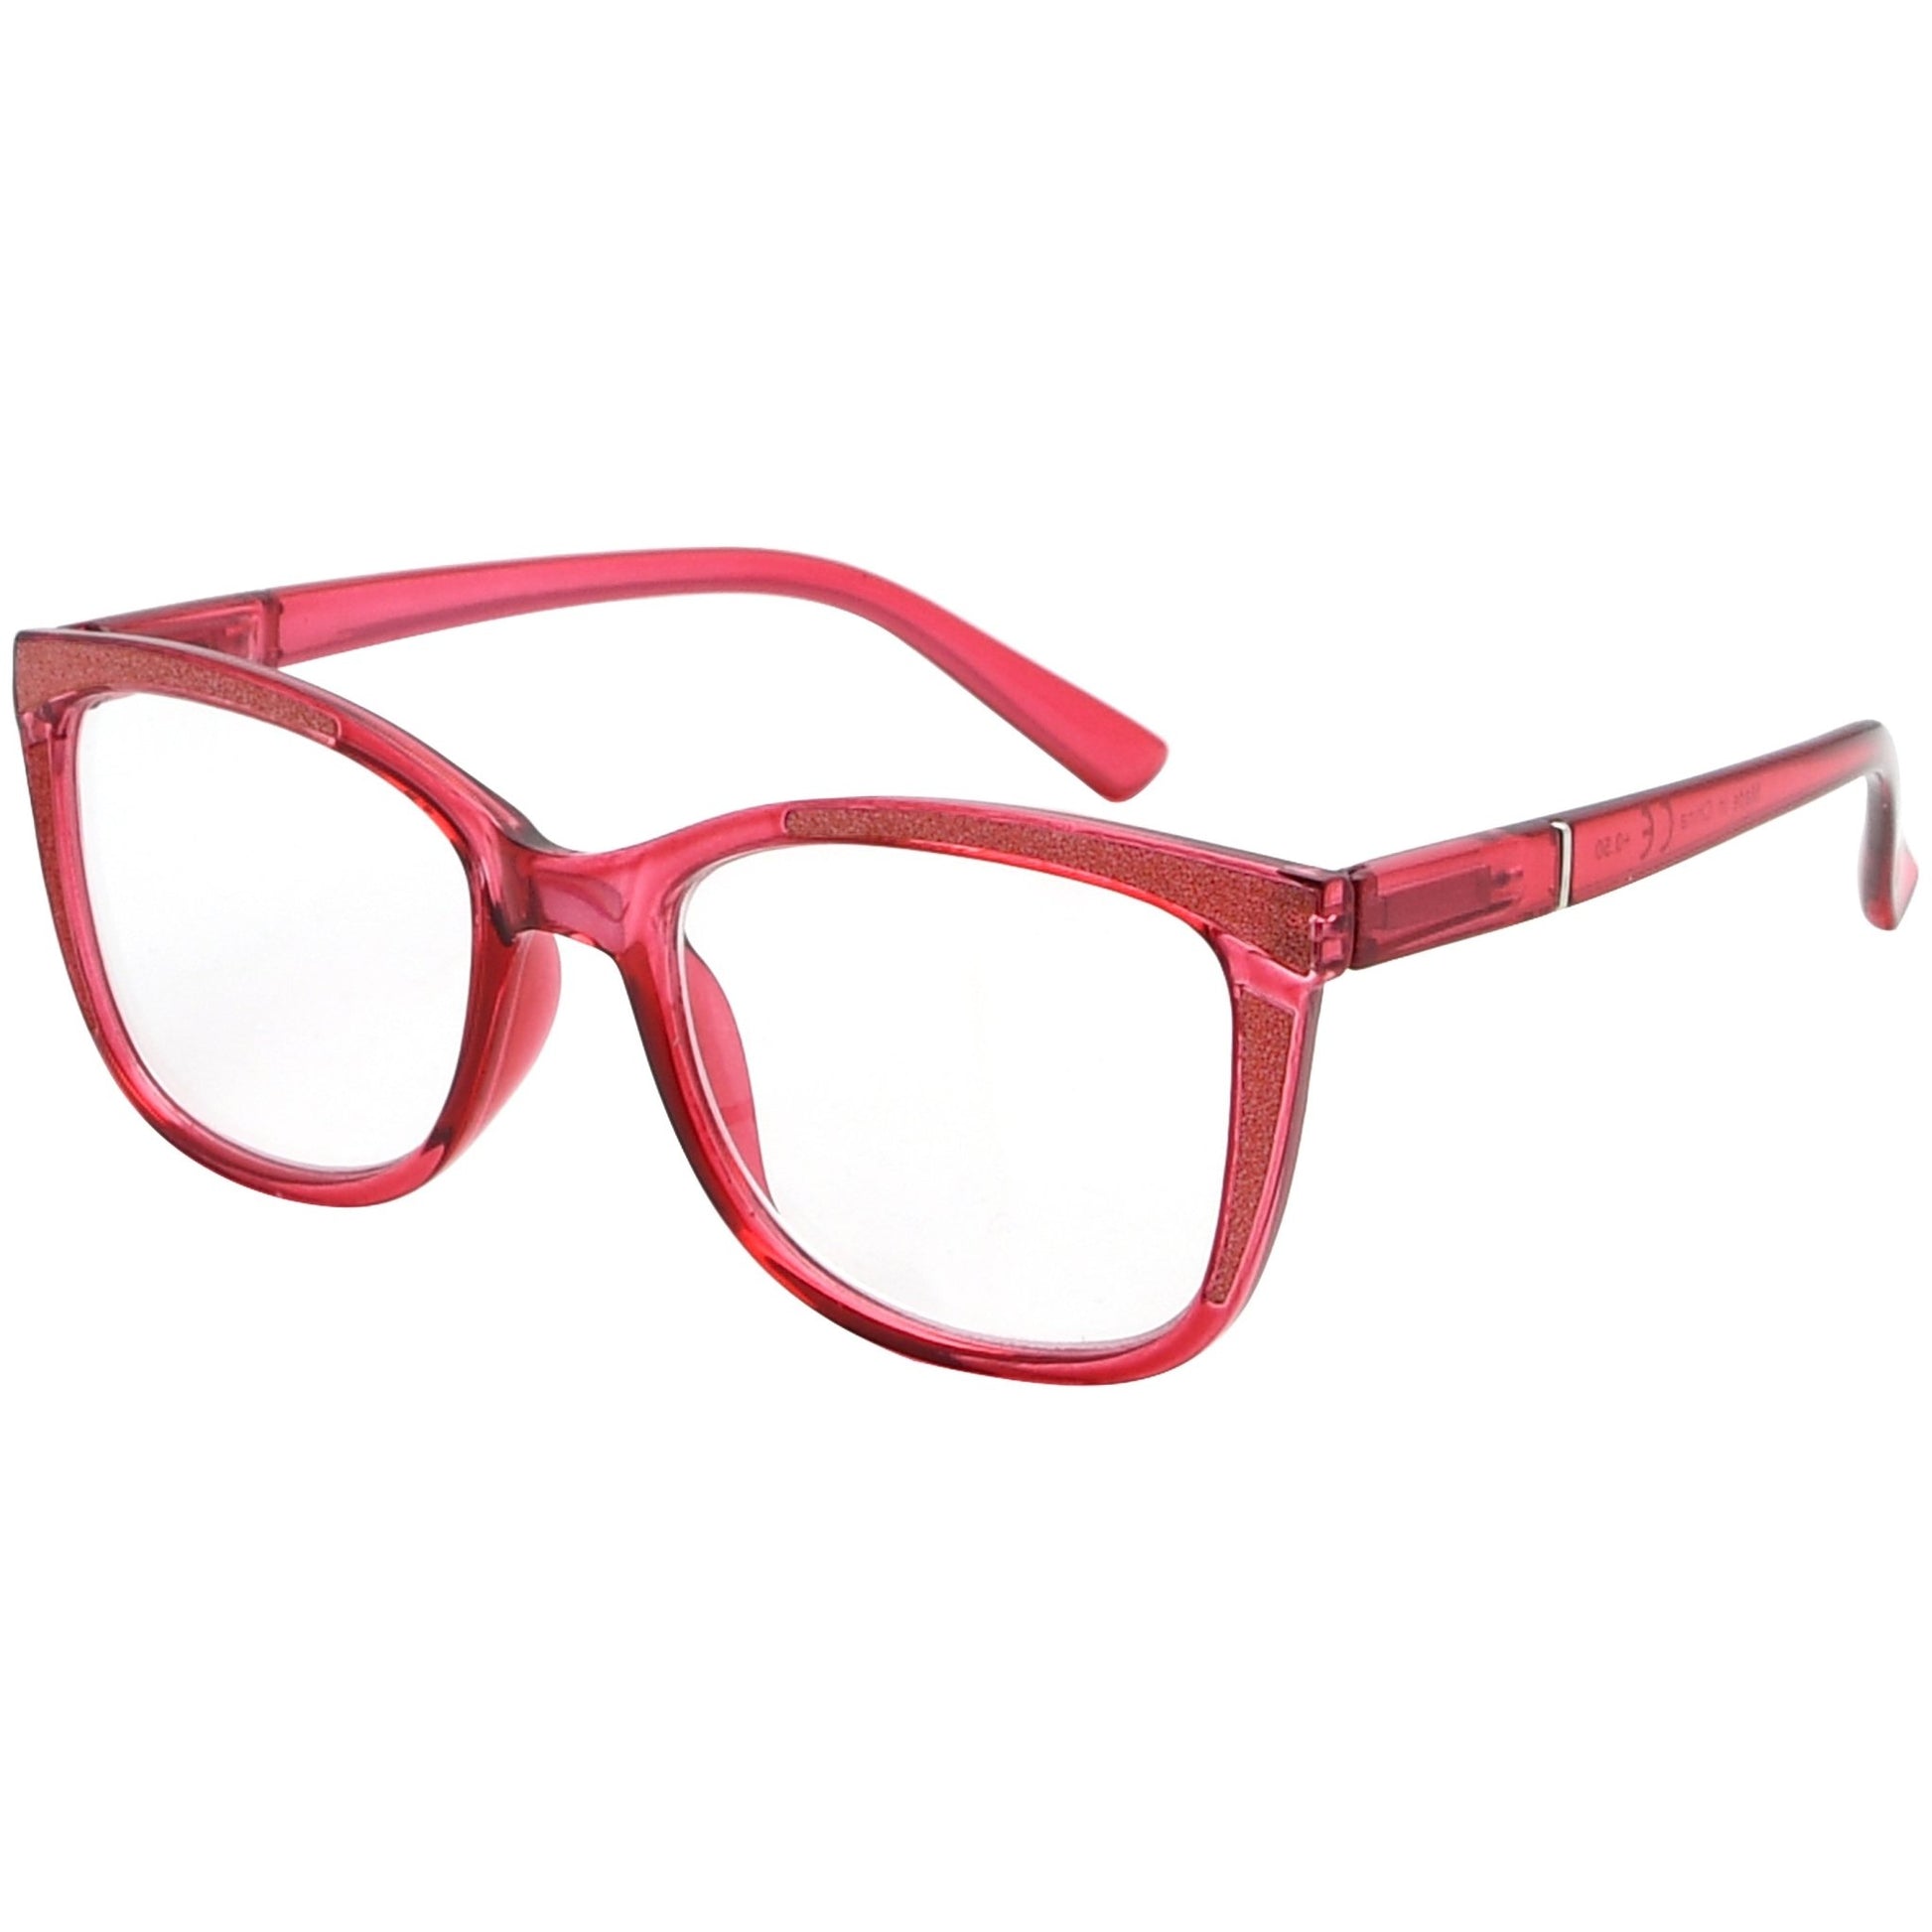 Stylish Reading Glasses Red R2030